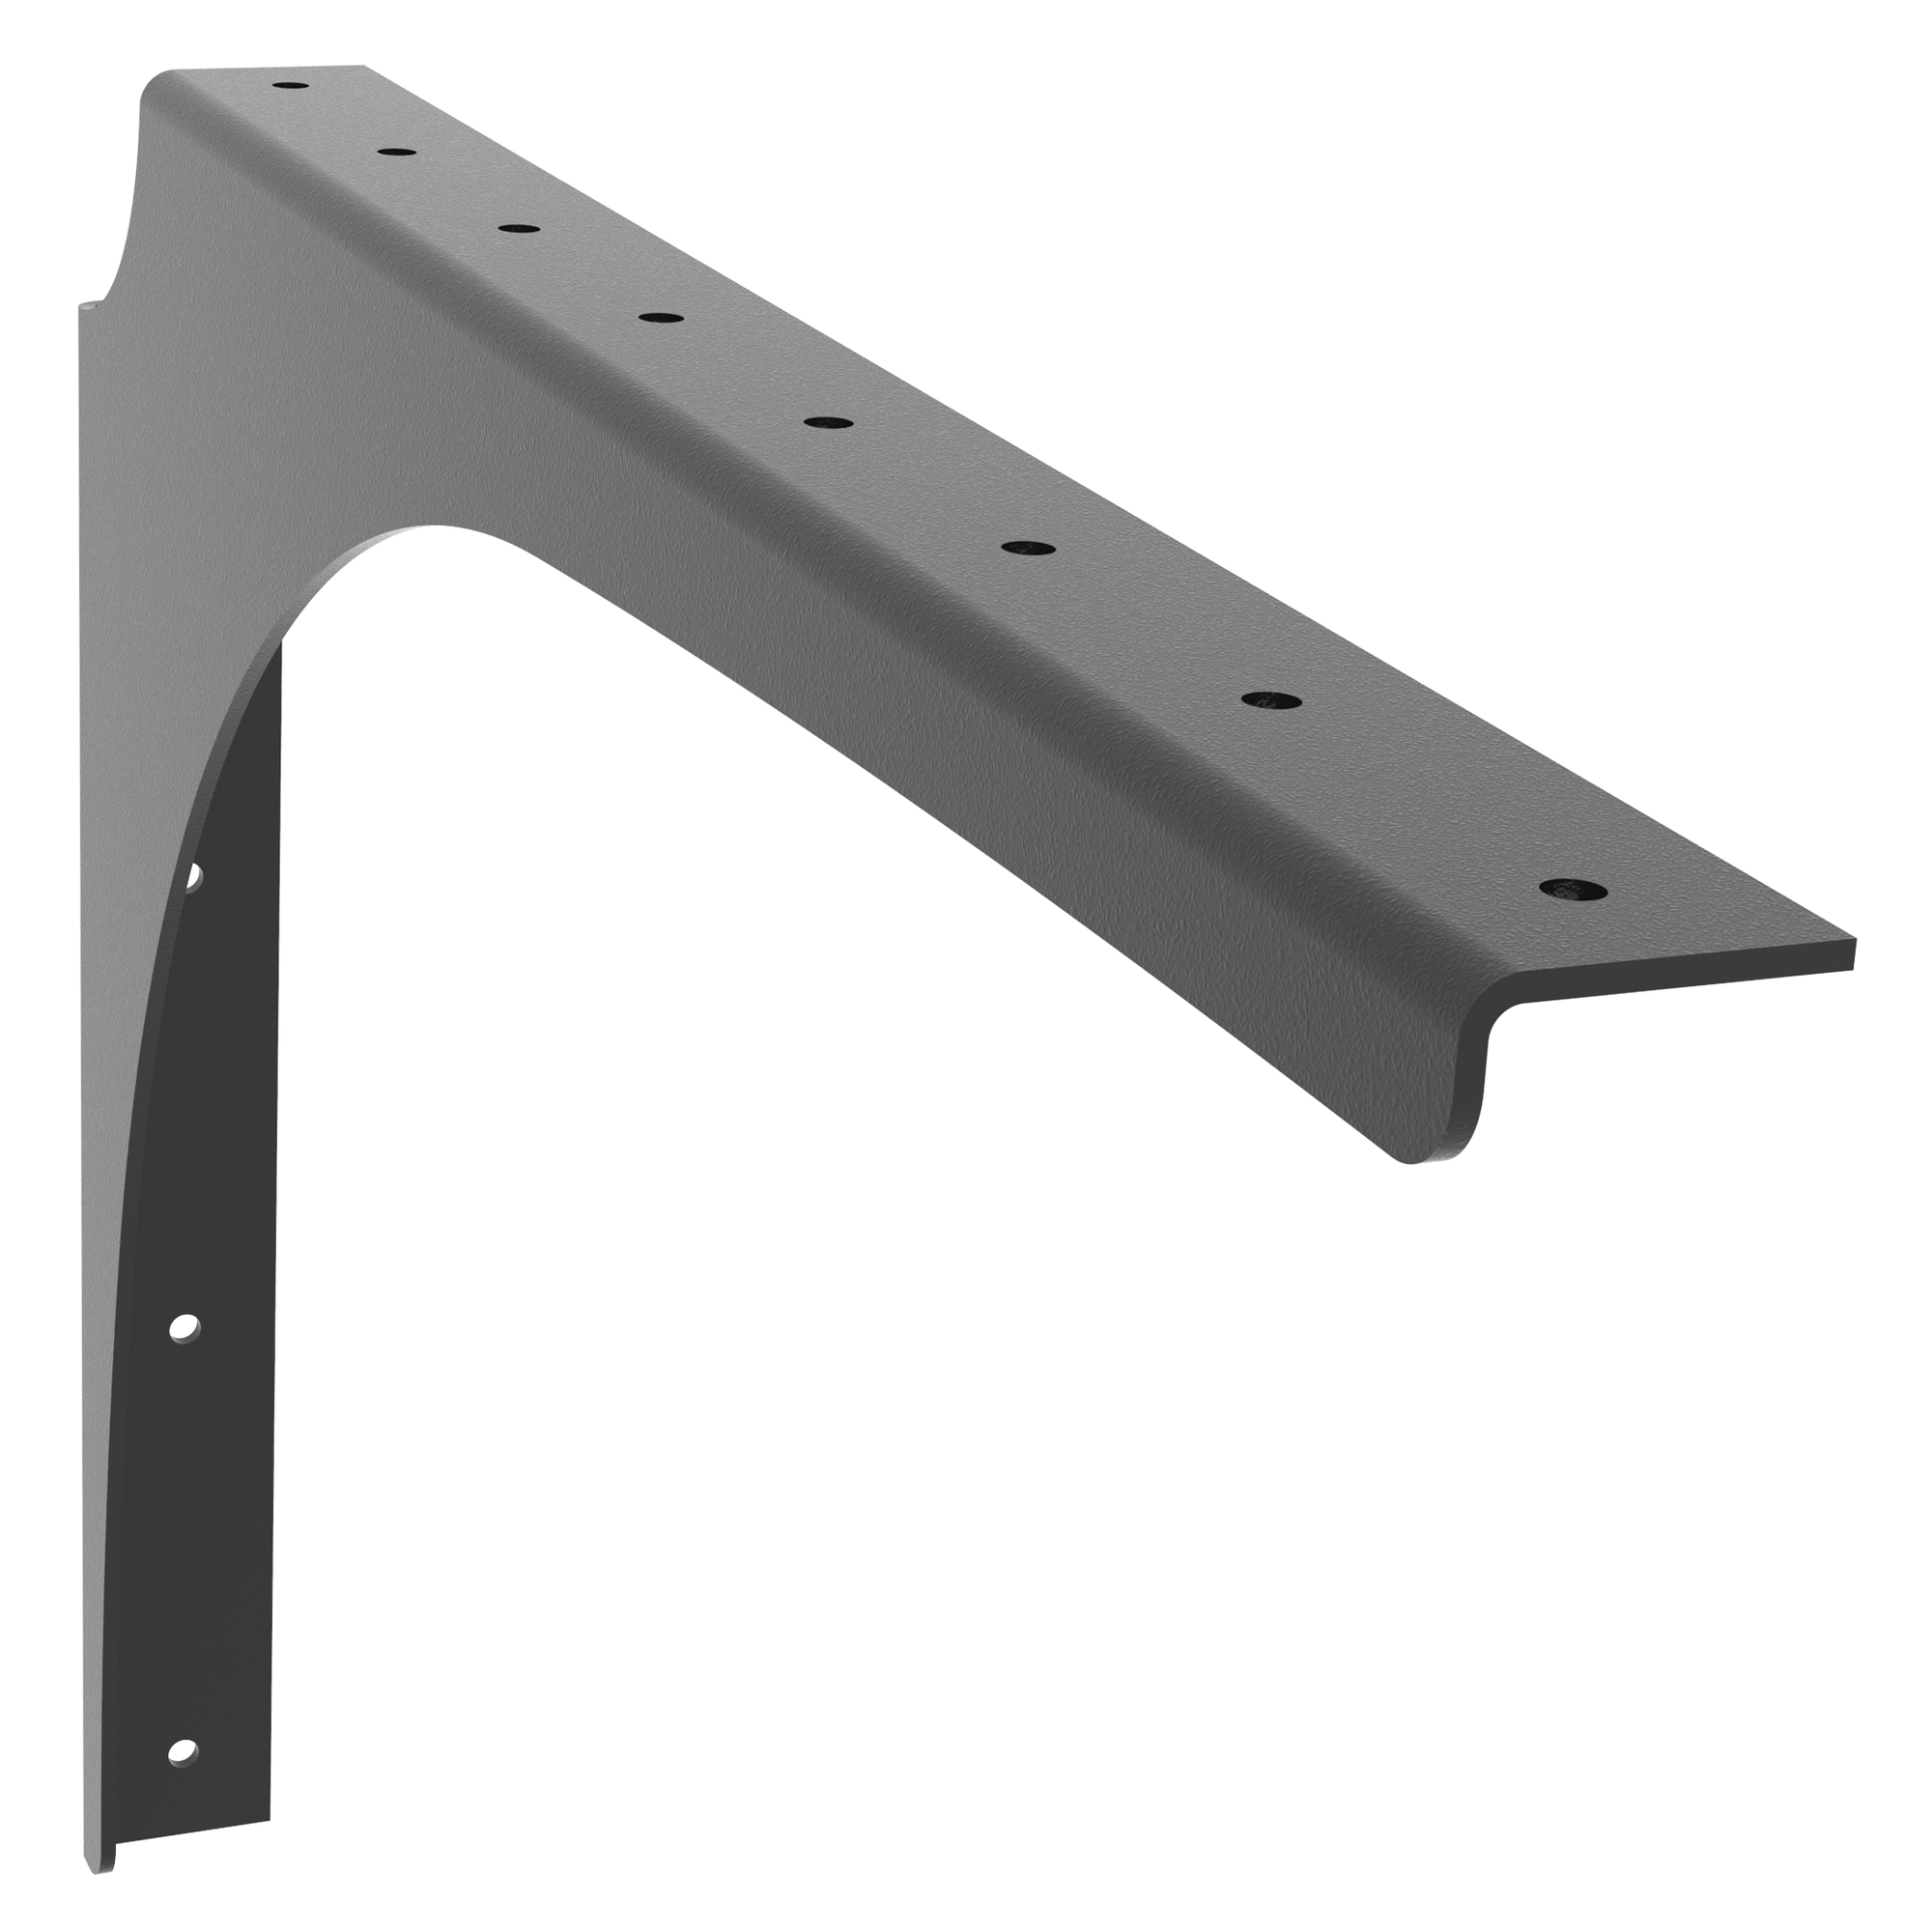 Universal Commercial Support Bracket - 21" x 15" Left Handedwith Black Powder Coat Finish. Supports floating ADA-compliant vanities, desks, shelving, countertops, and more.